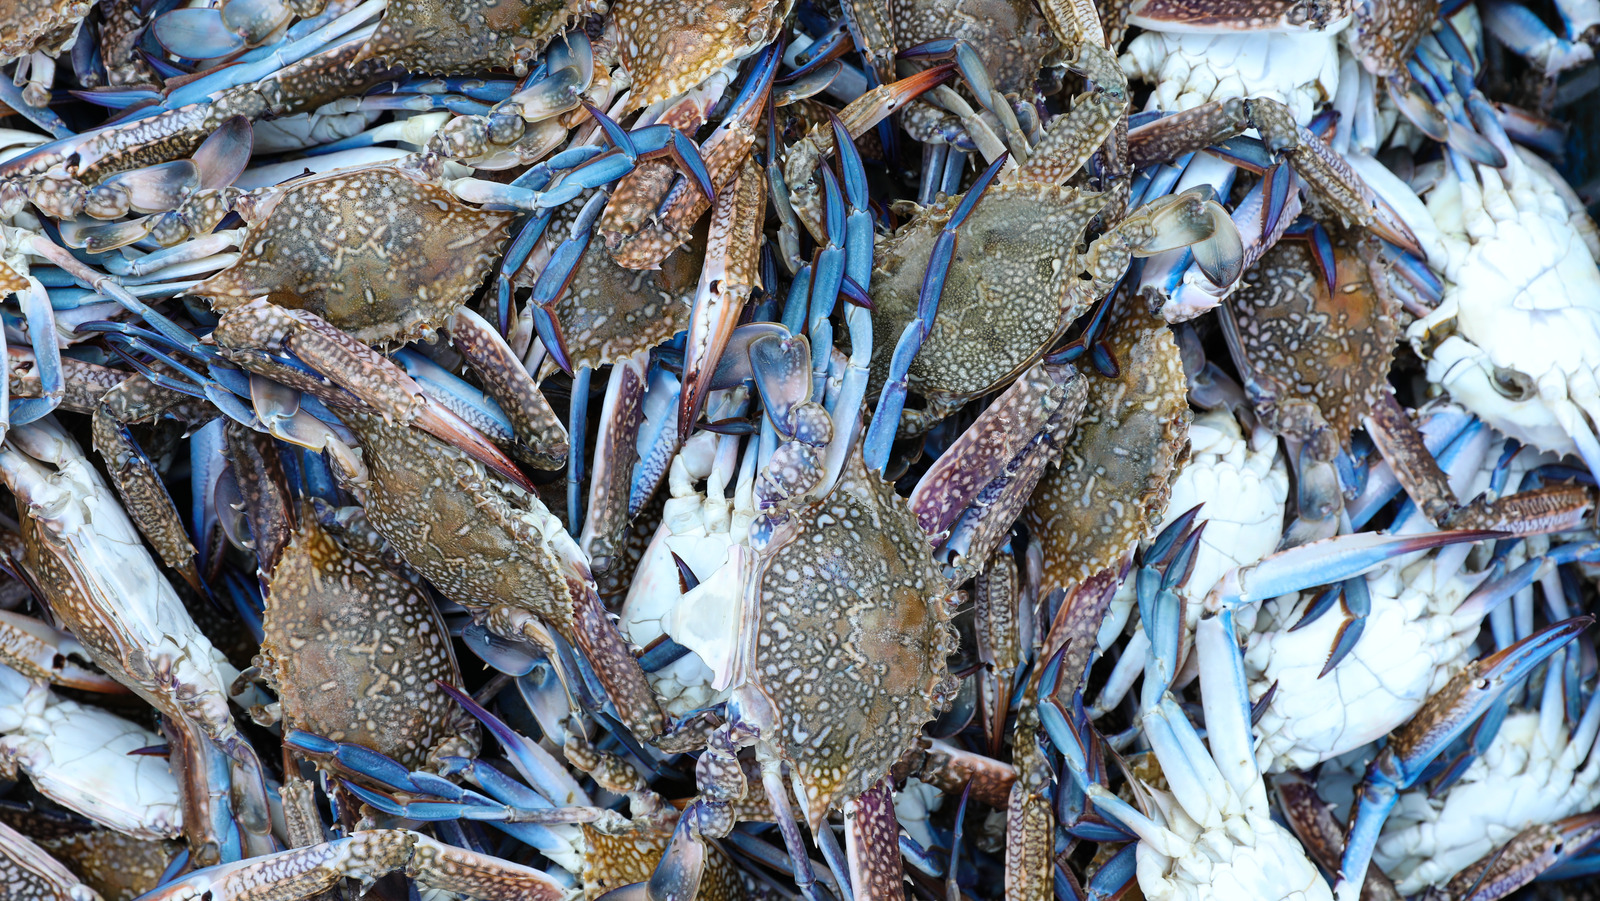 Why We'll Face A Crab Shortage In 2022, According To An Expert